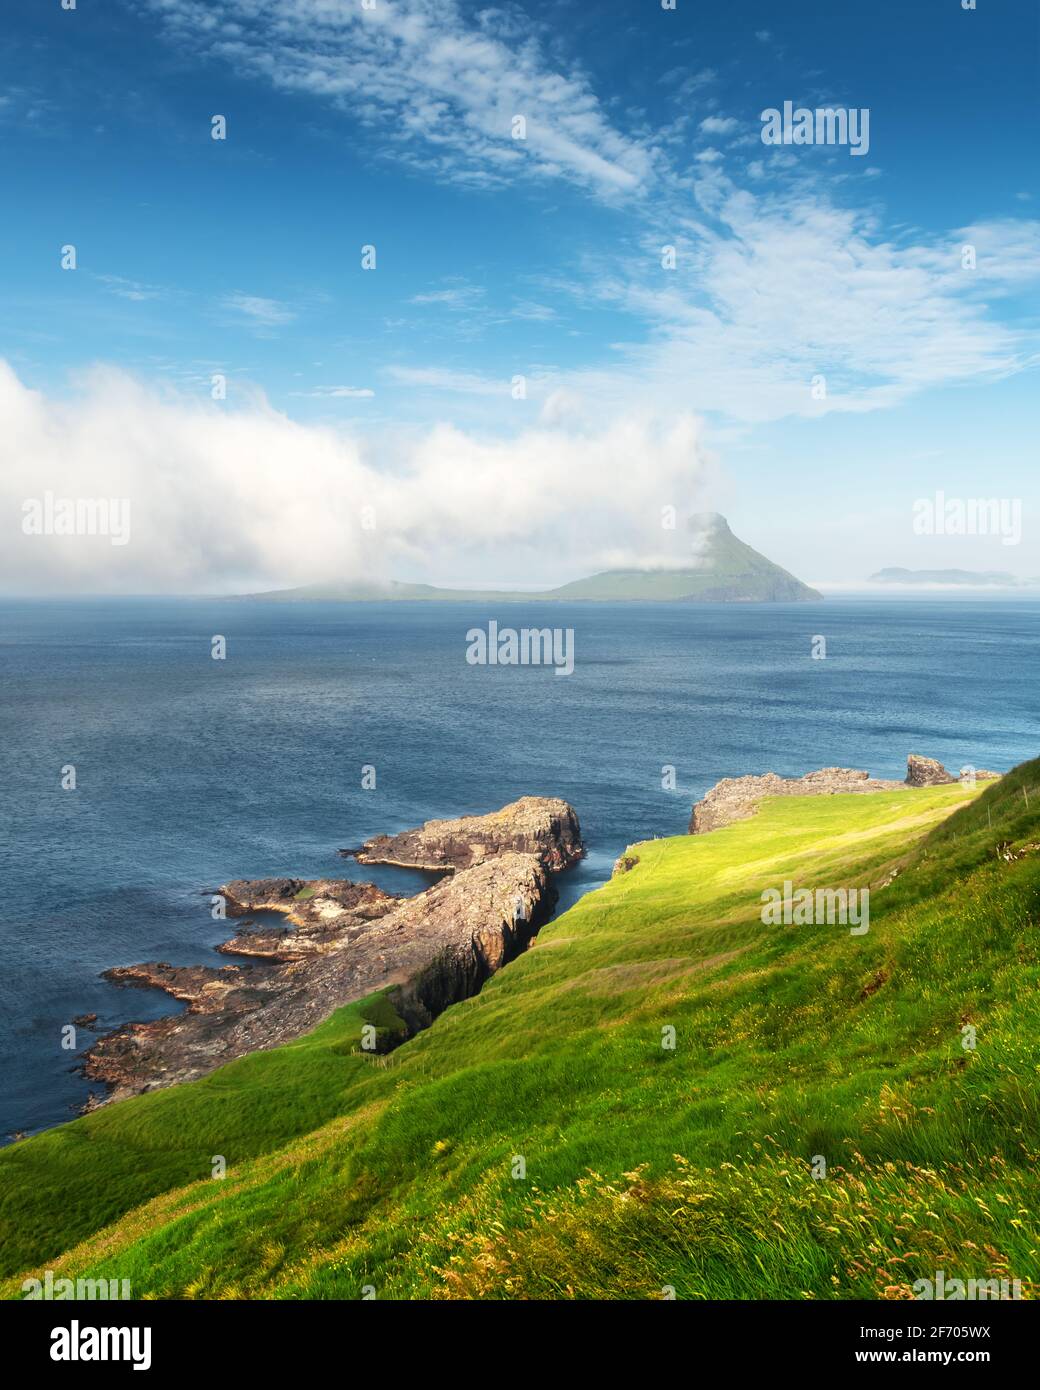 Morning view onto the Faroese island Koltur with spectacular clouds and blue water in a dramatic valley with mountain range. Faroe Islands, Denmark. L Stock Photo